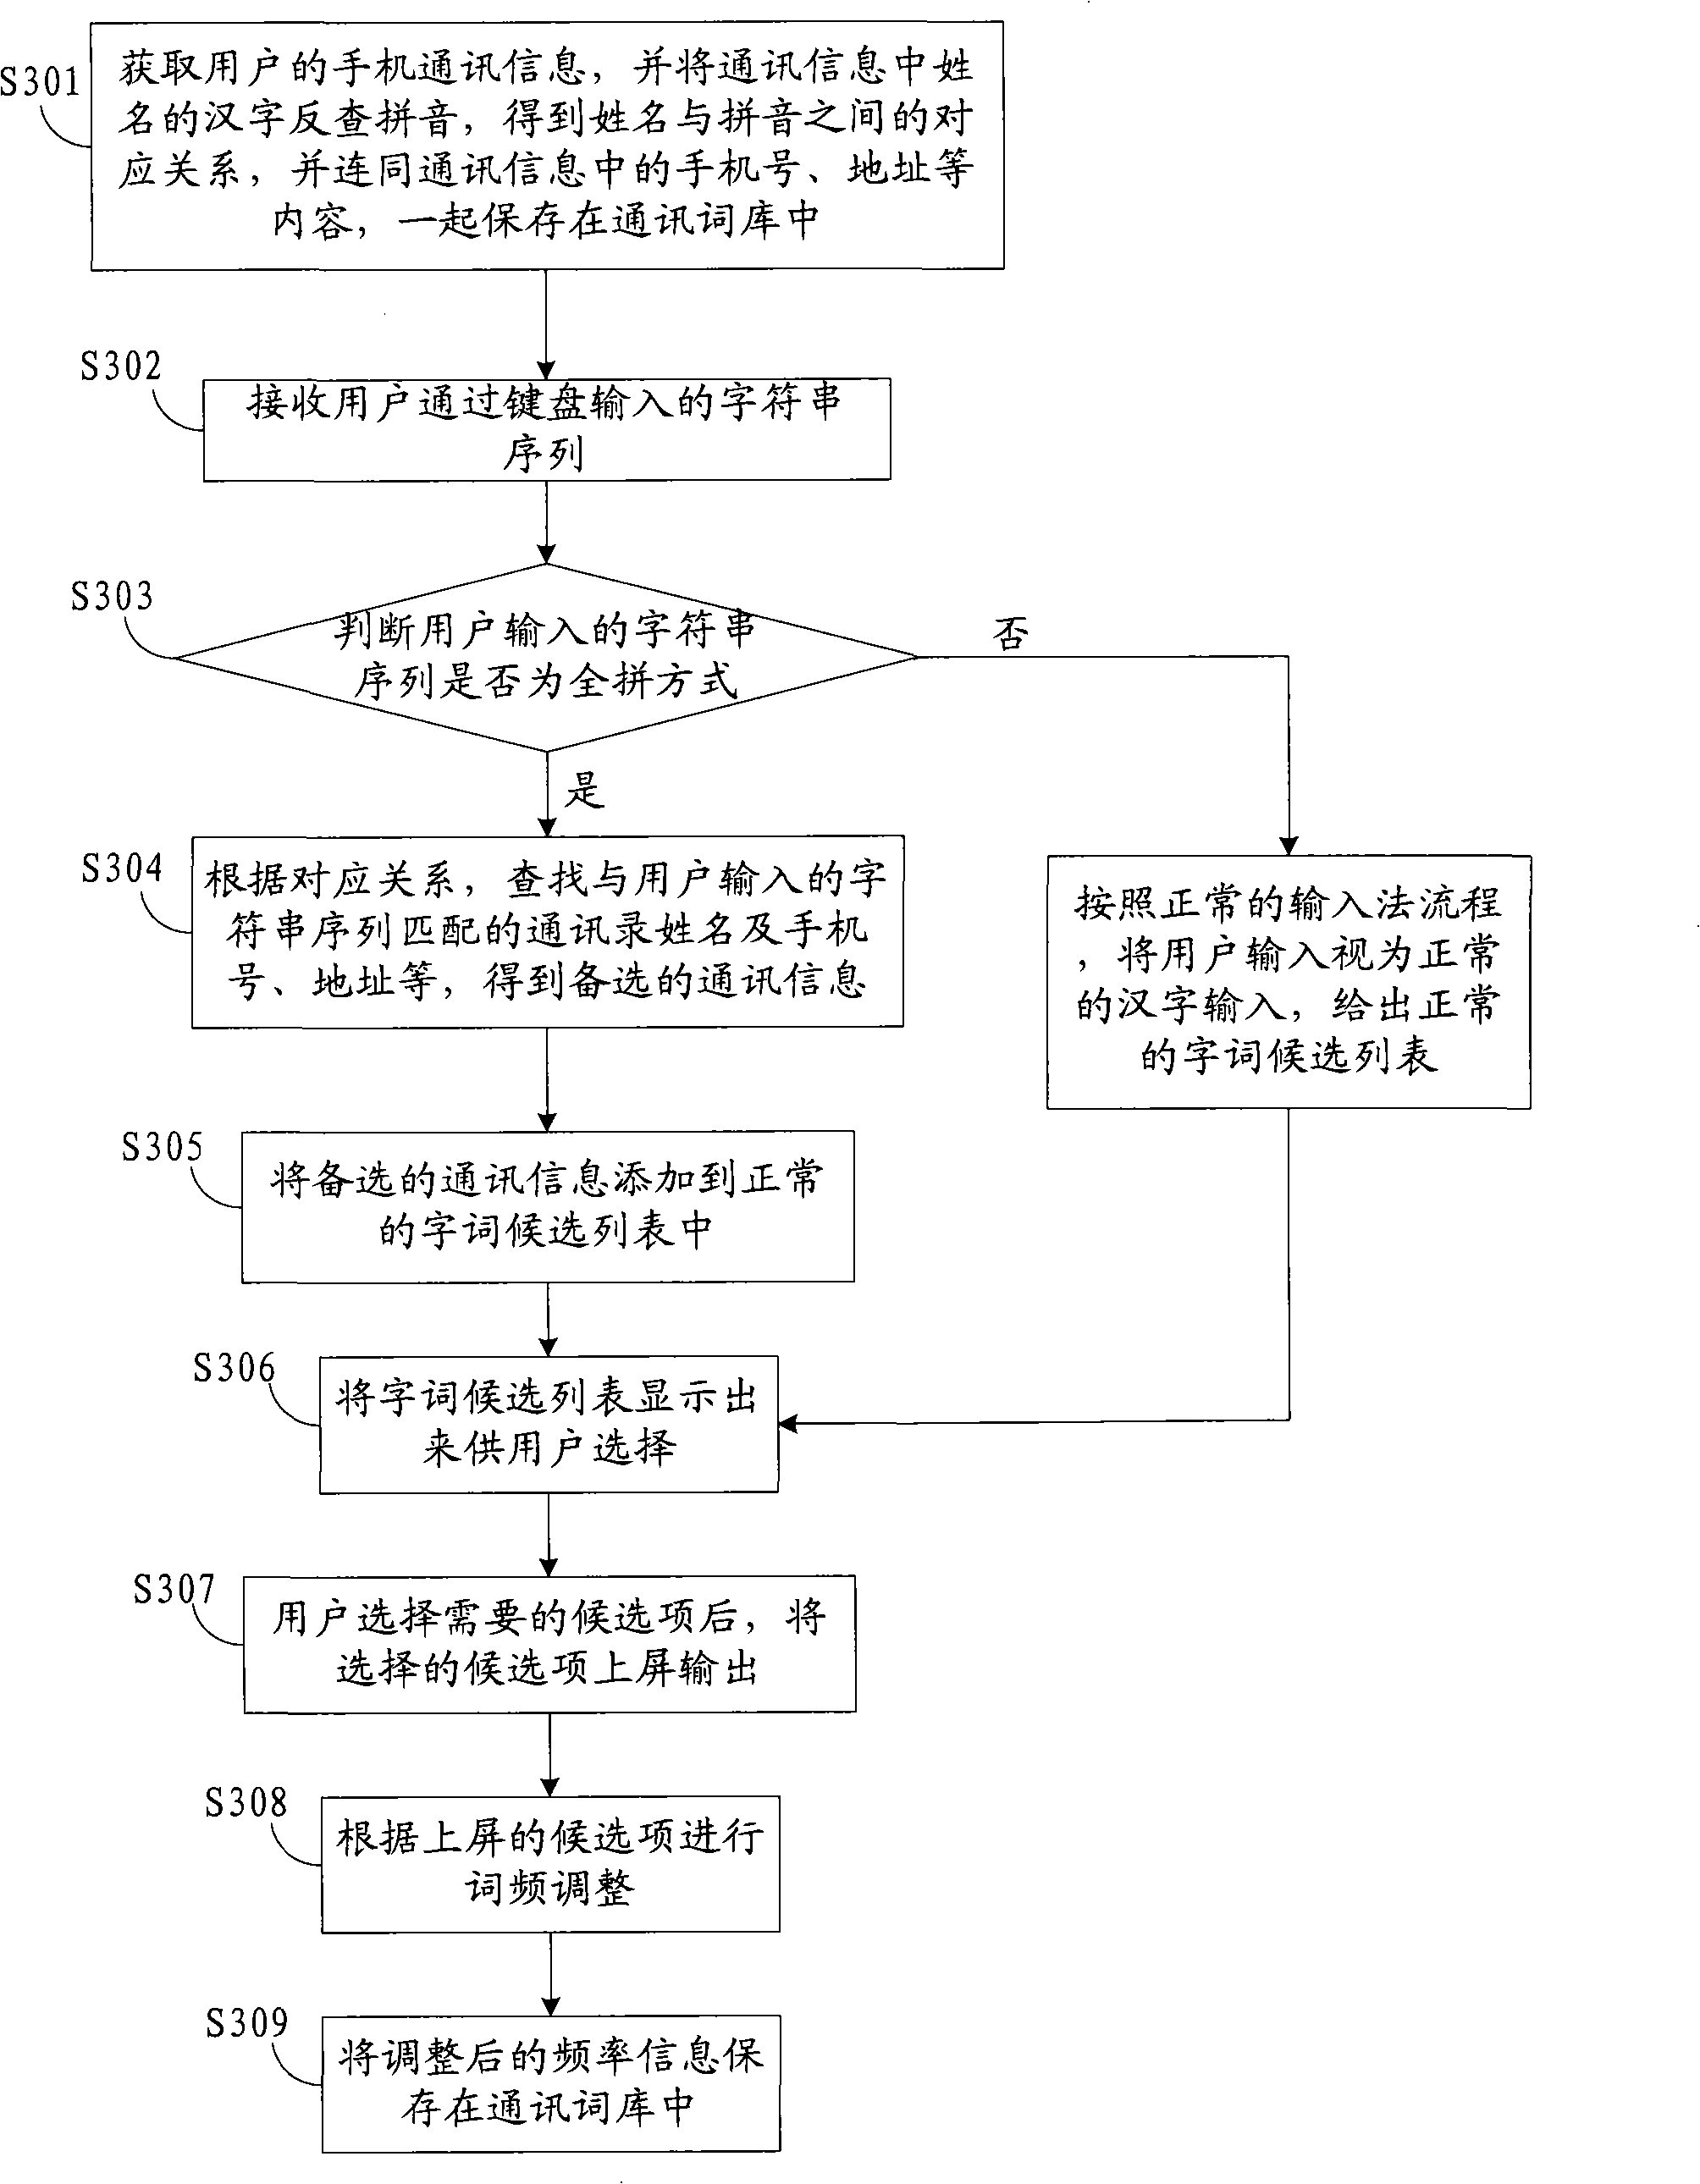 Method and apparatus for outputting communication information